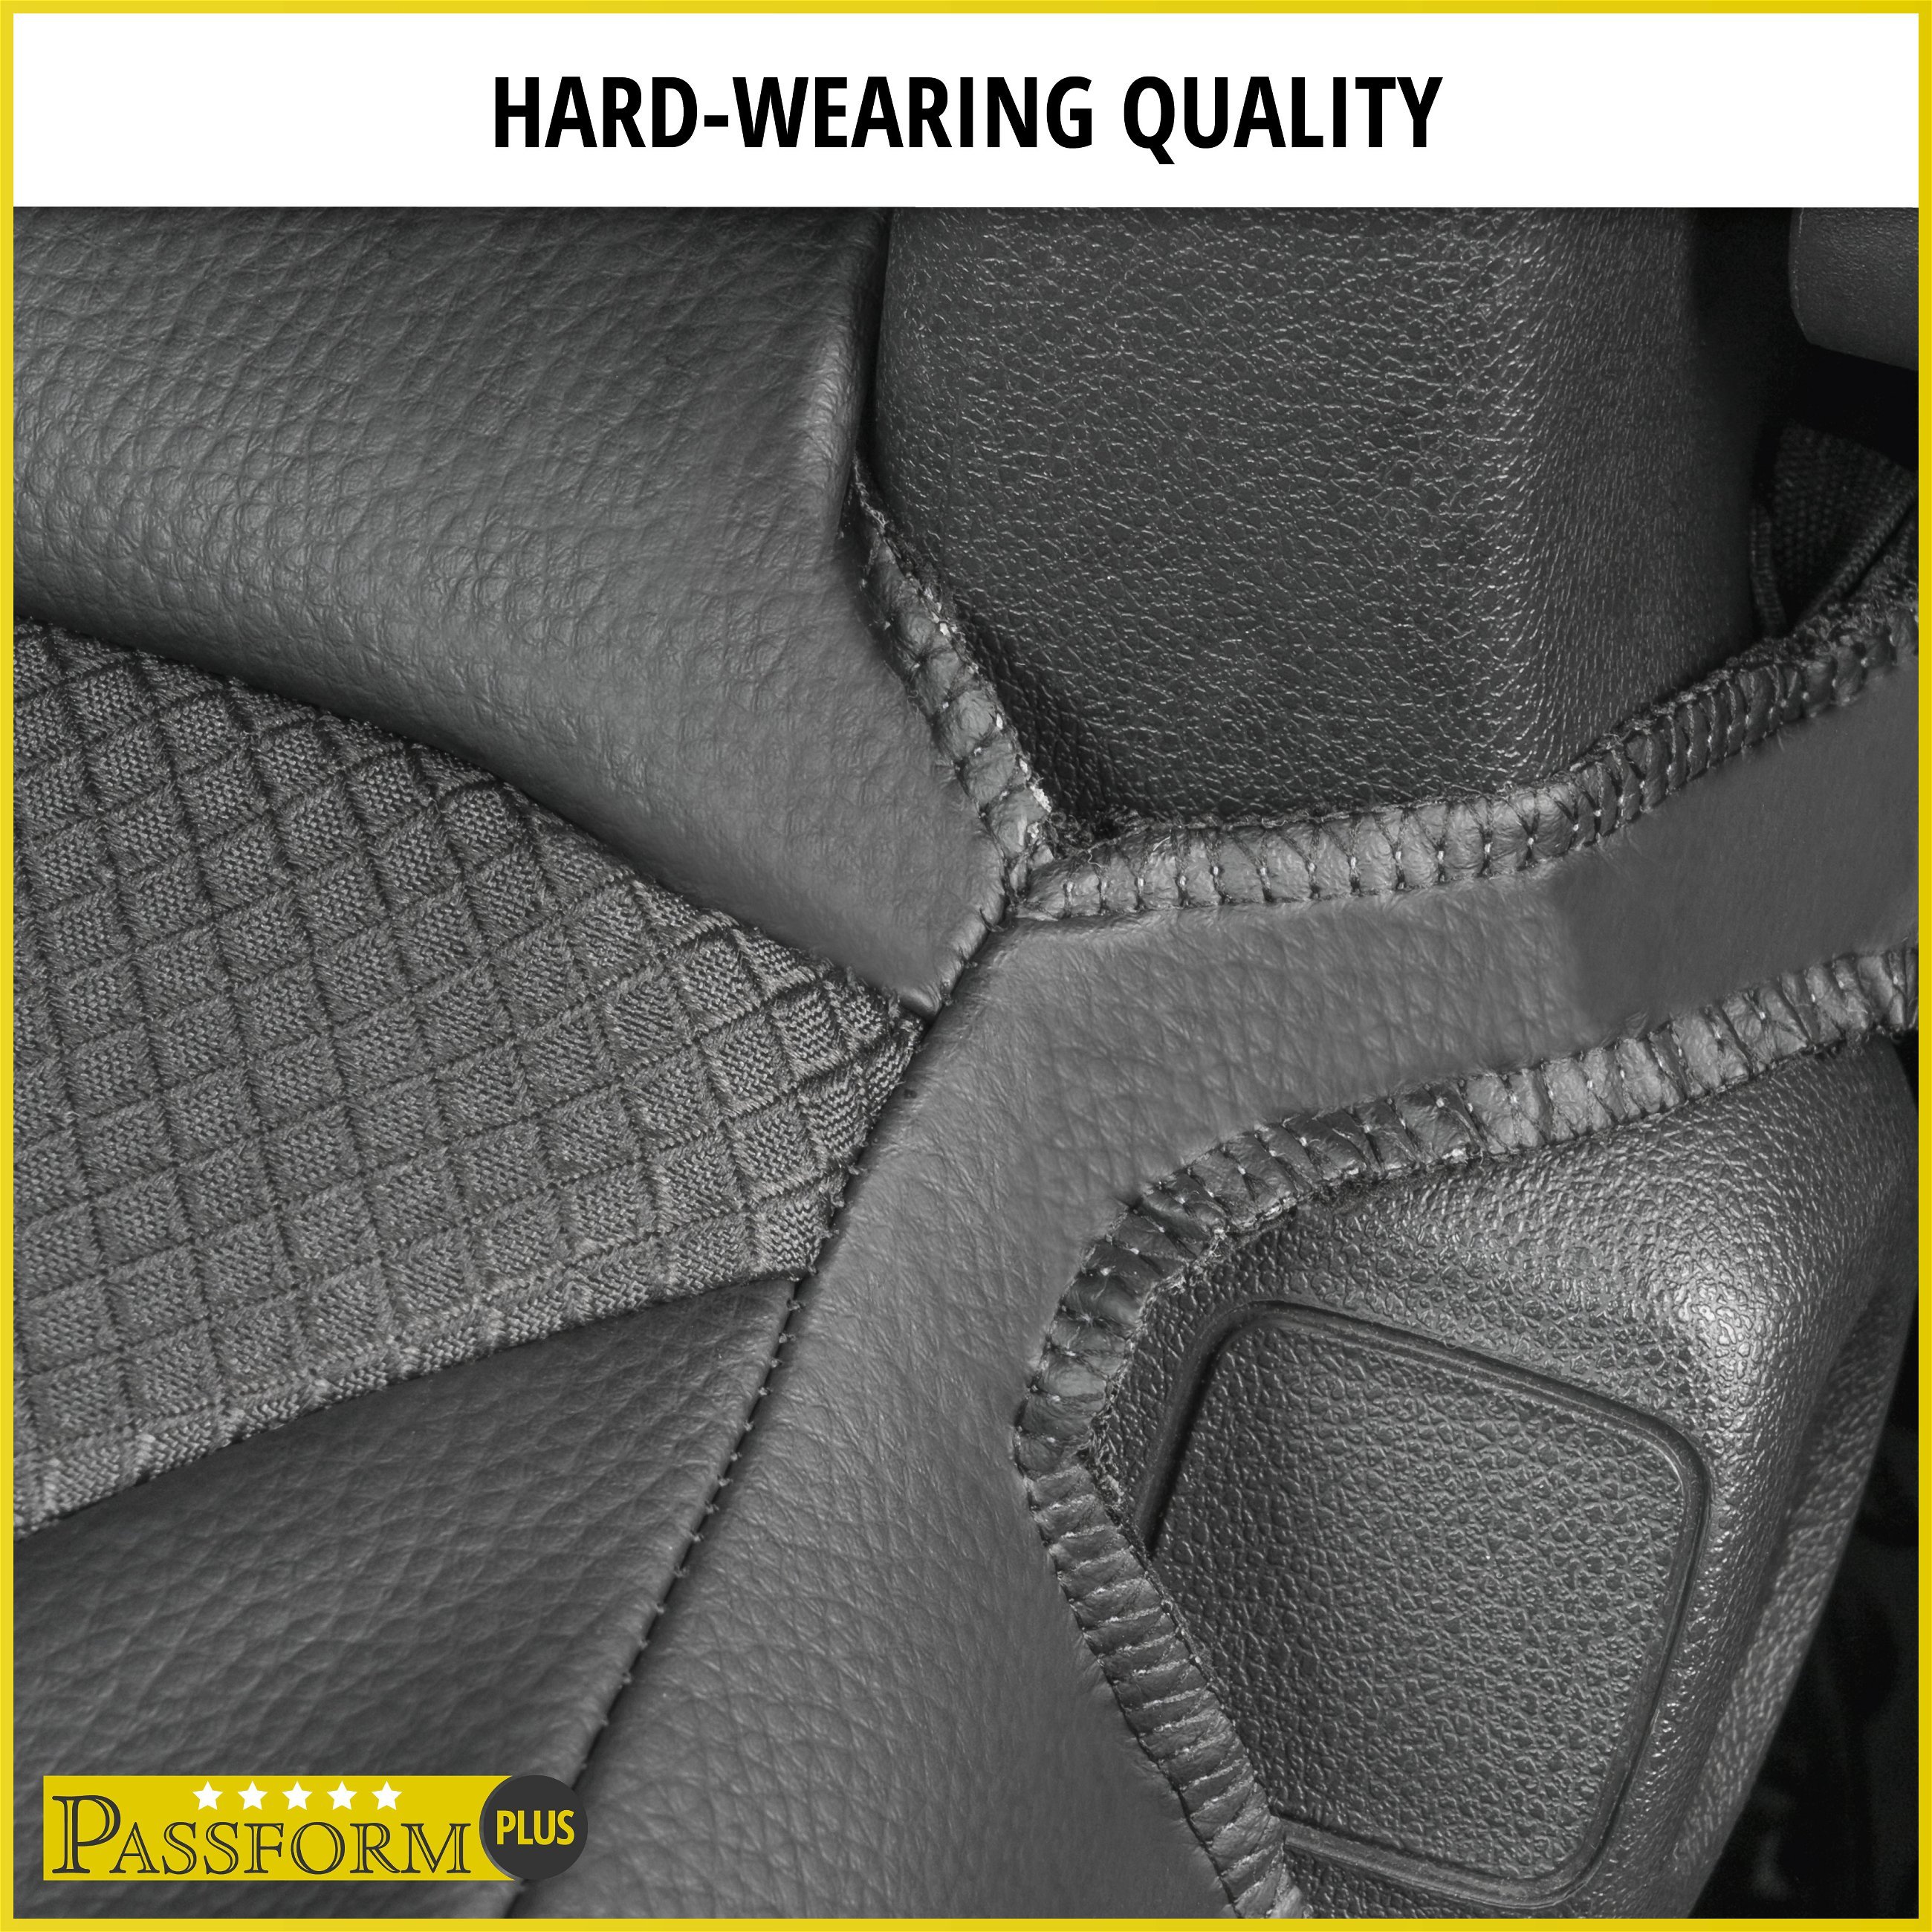 Premium Seat Cover for Fiat Talento 06/2016-Today, 2 single seat covers front + 2 armrest covers